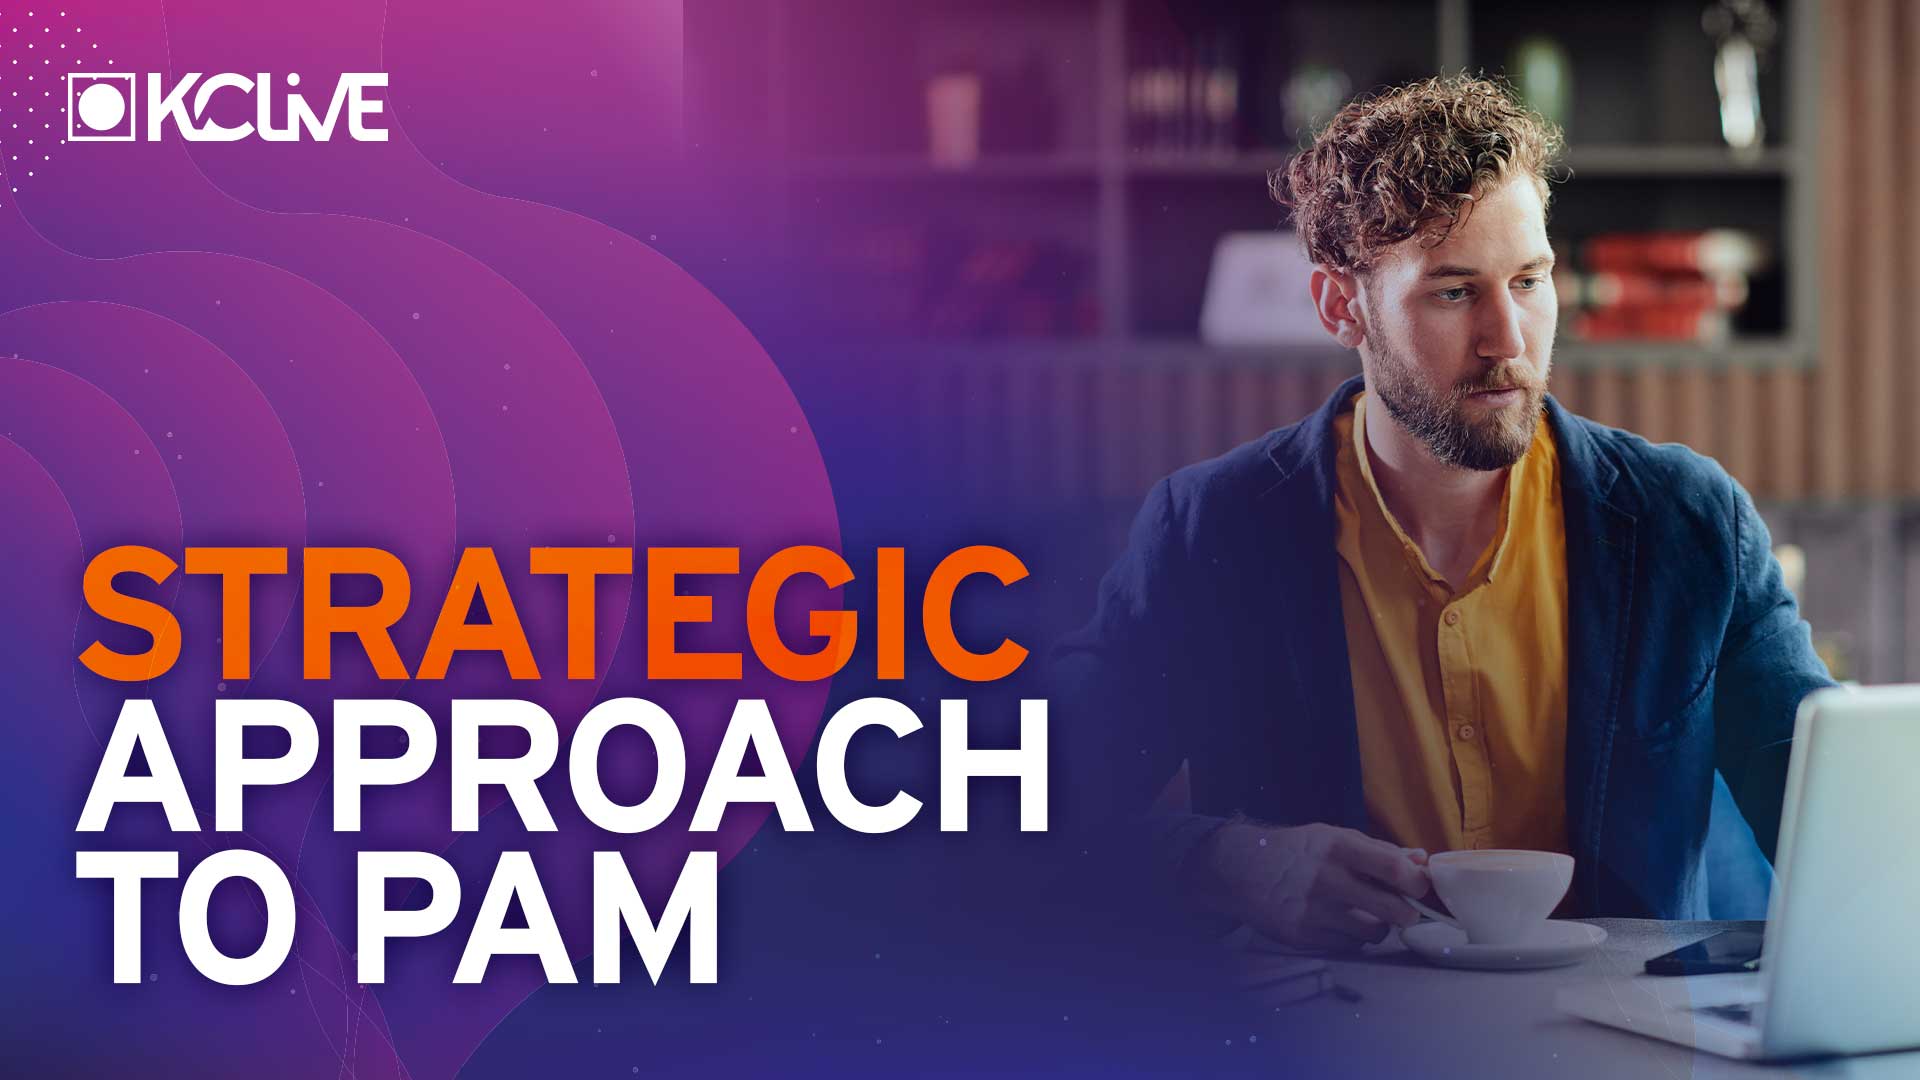 Paul Simmonds: Why Your Business Needs a Strategic Approach to PAM